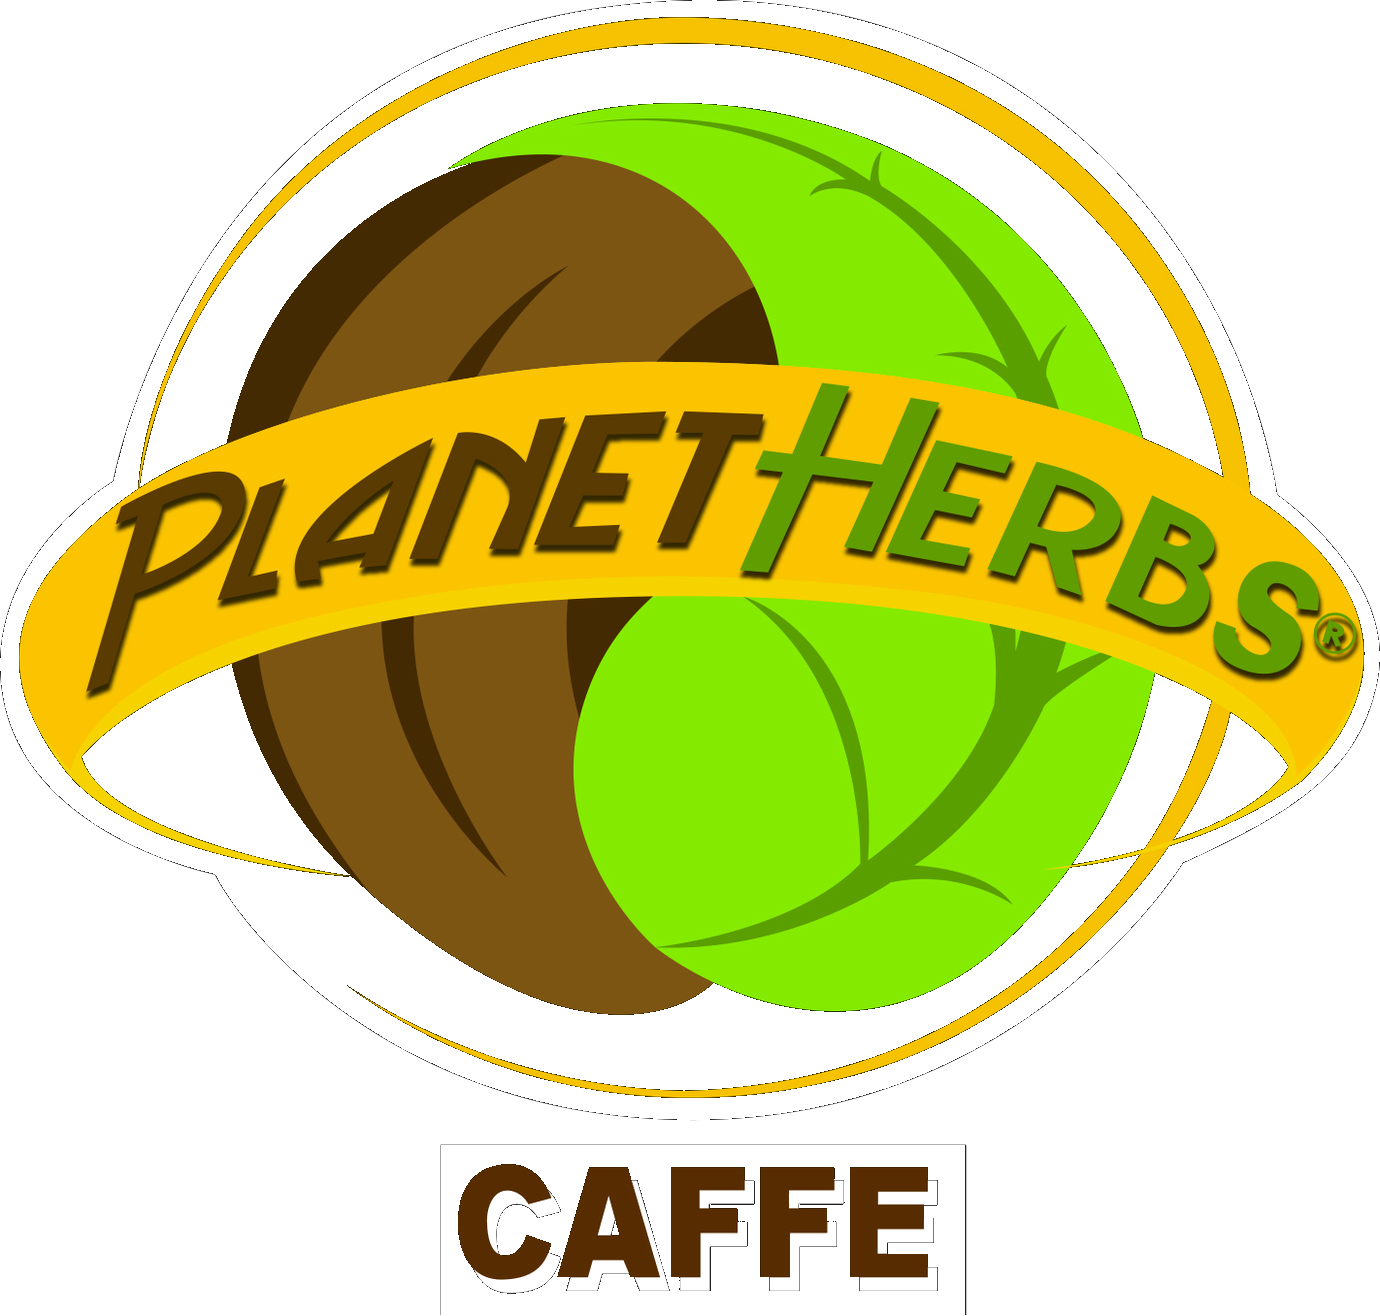 Planet Herbs Caffe